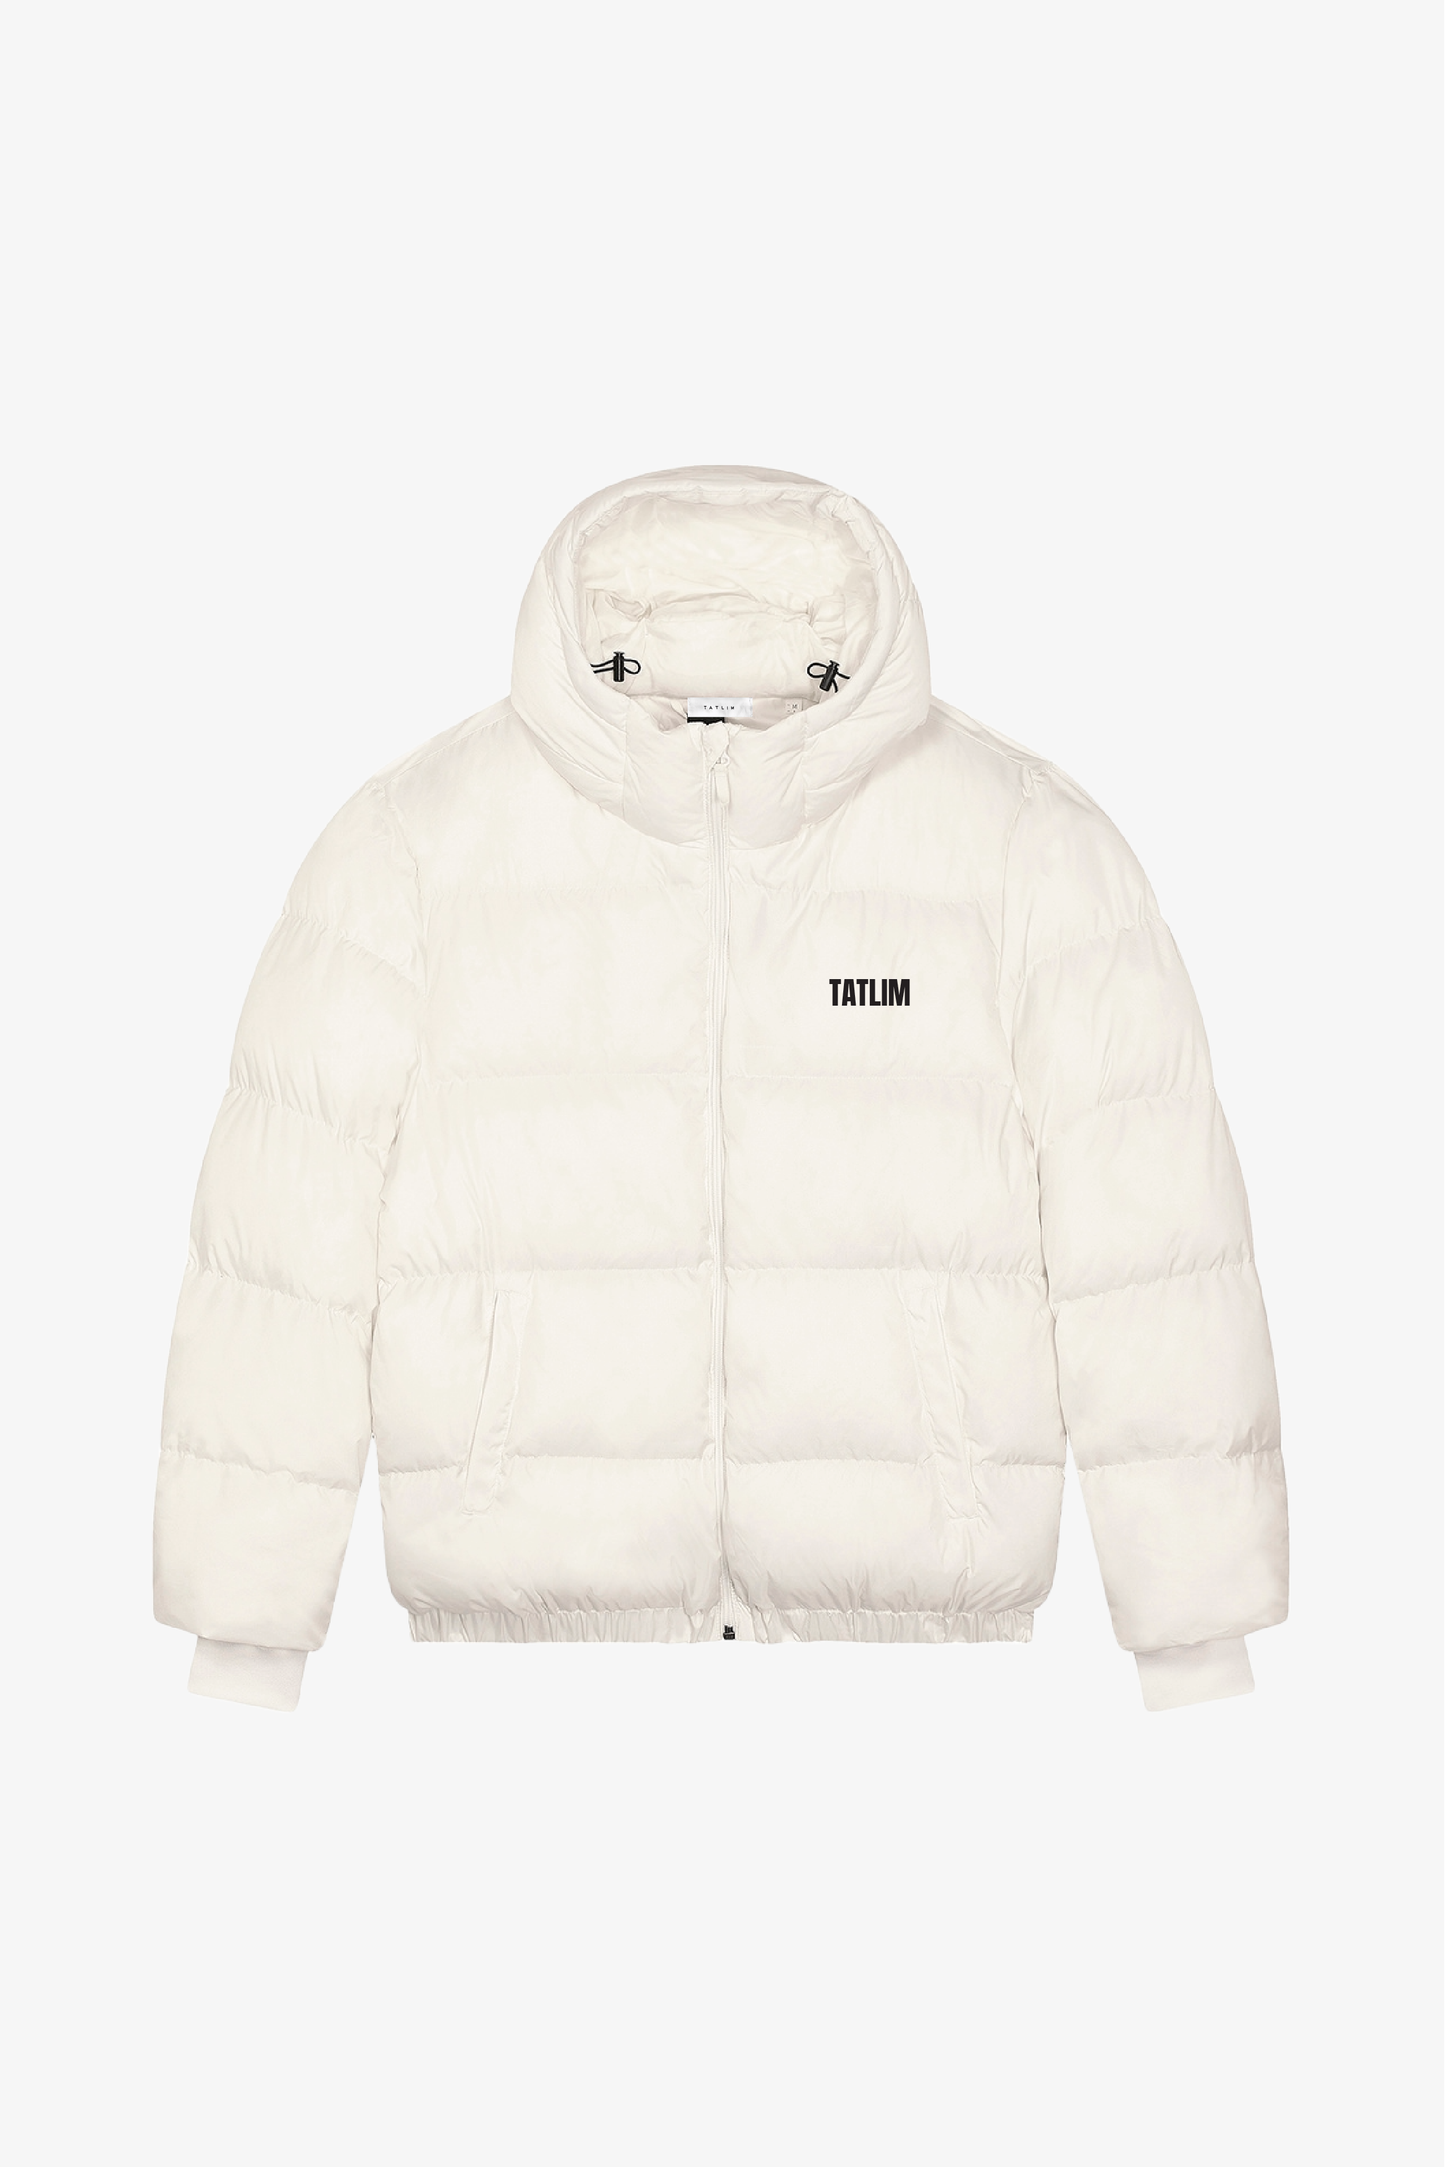 Off White Puffer Jacket